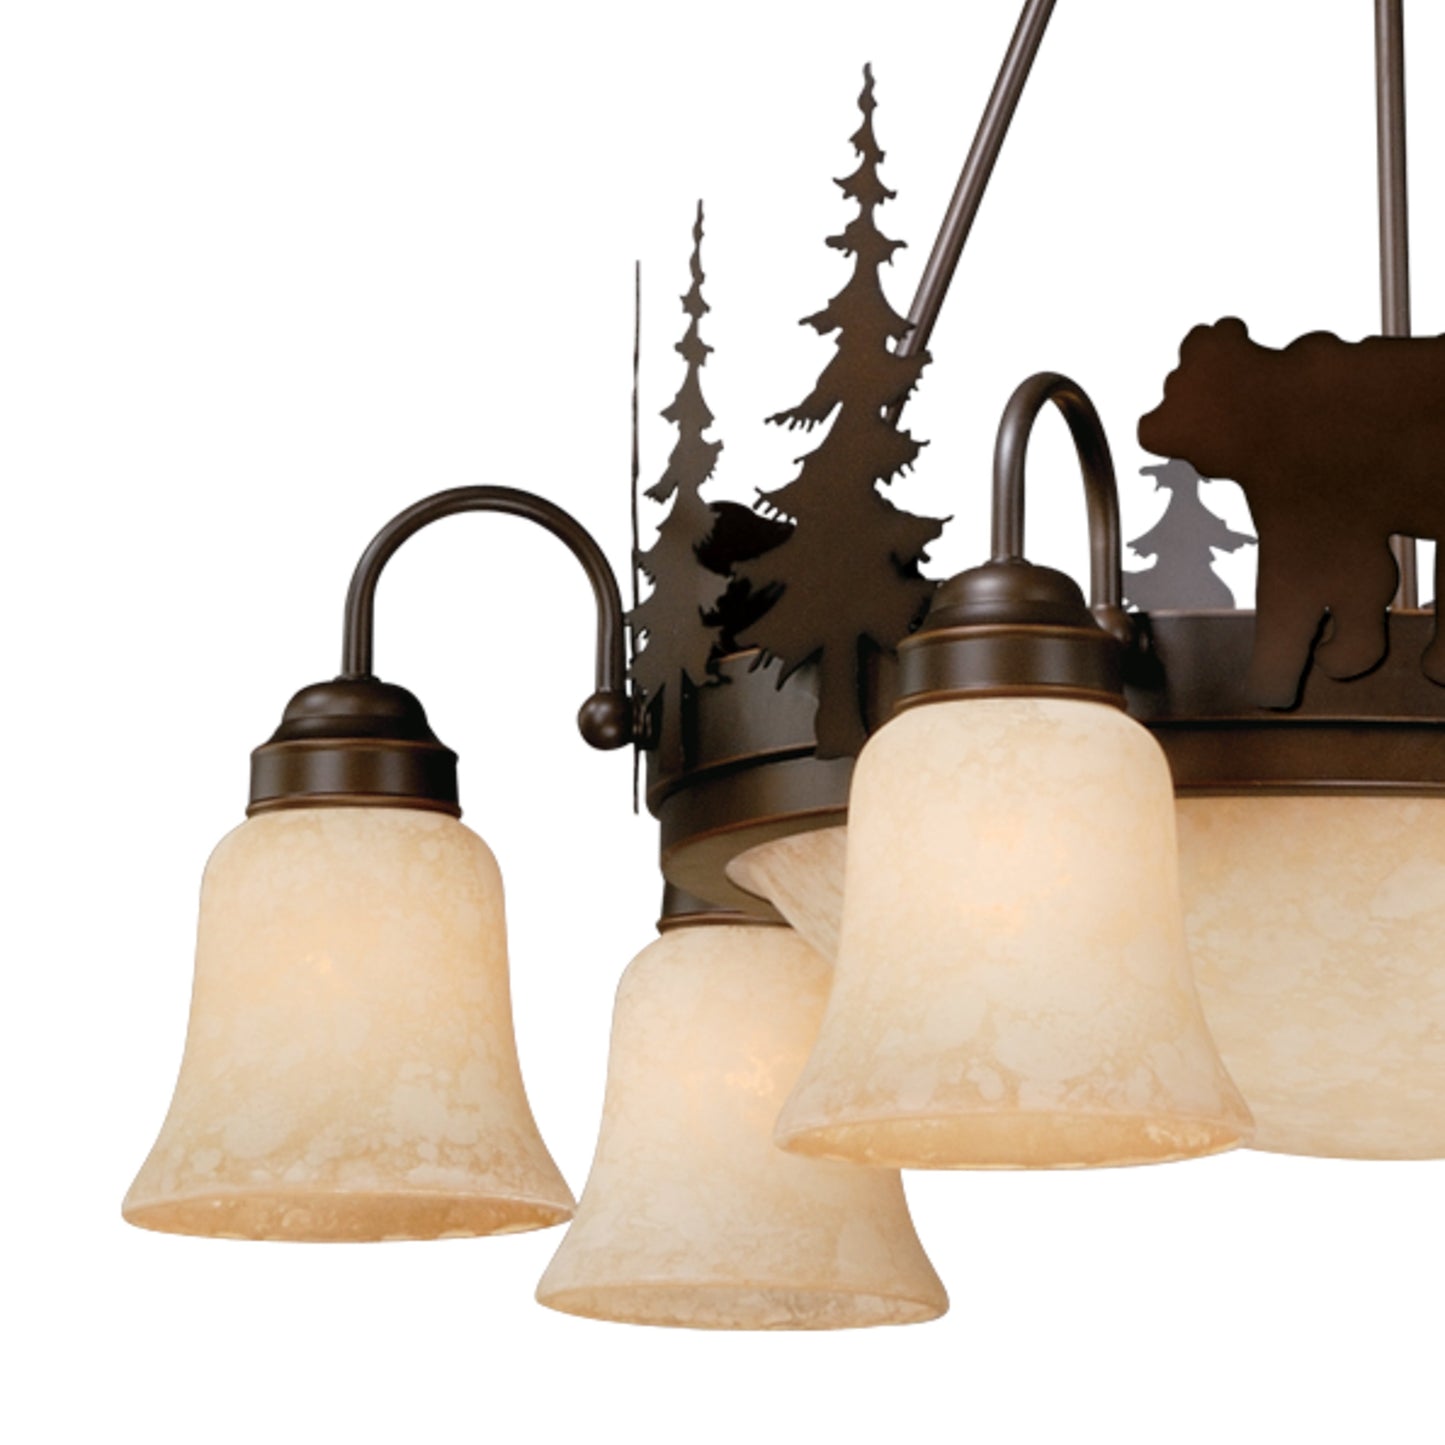 Vaxcel Bozeman 29" 9-Light Bronze Rustic Bear Steel Chandelier With Amber Flake Glass Shades